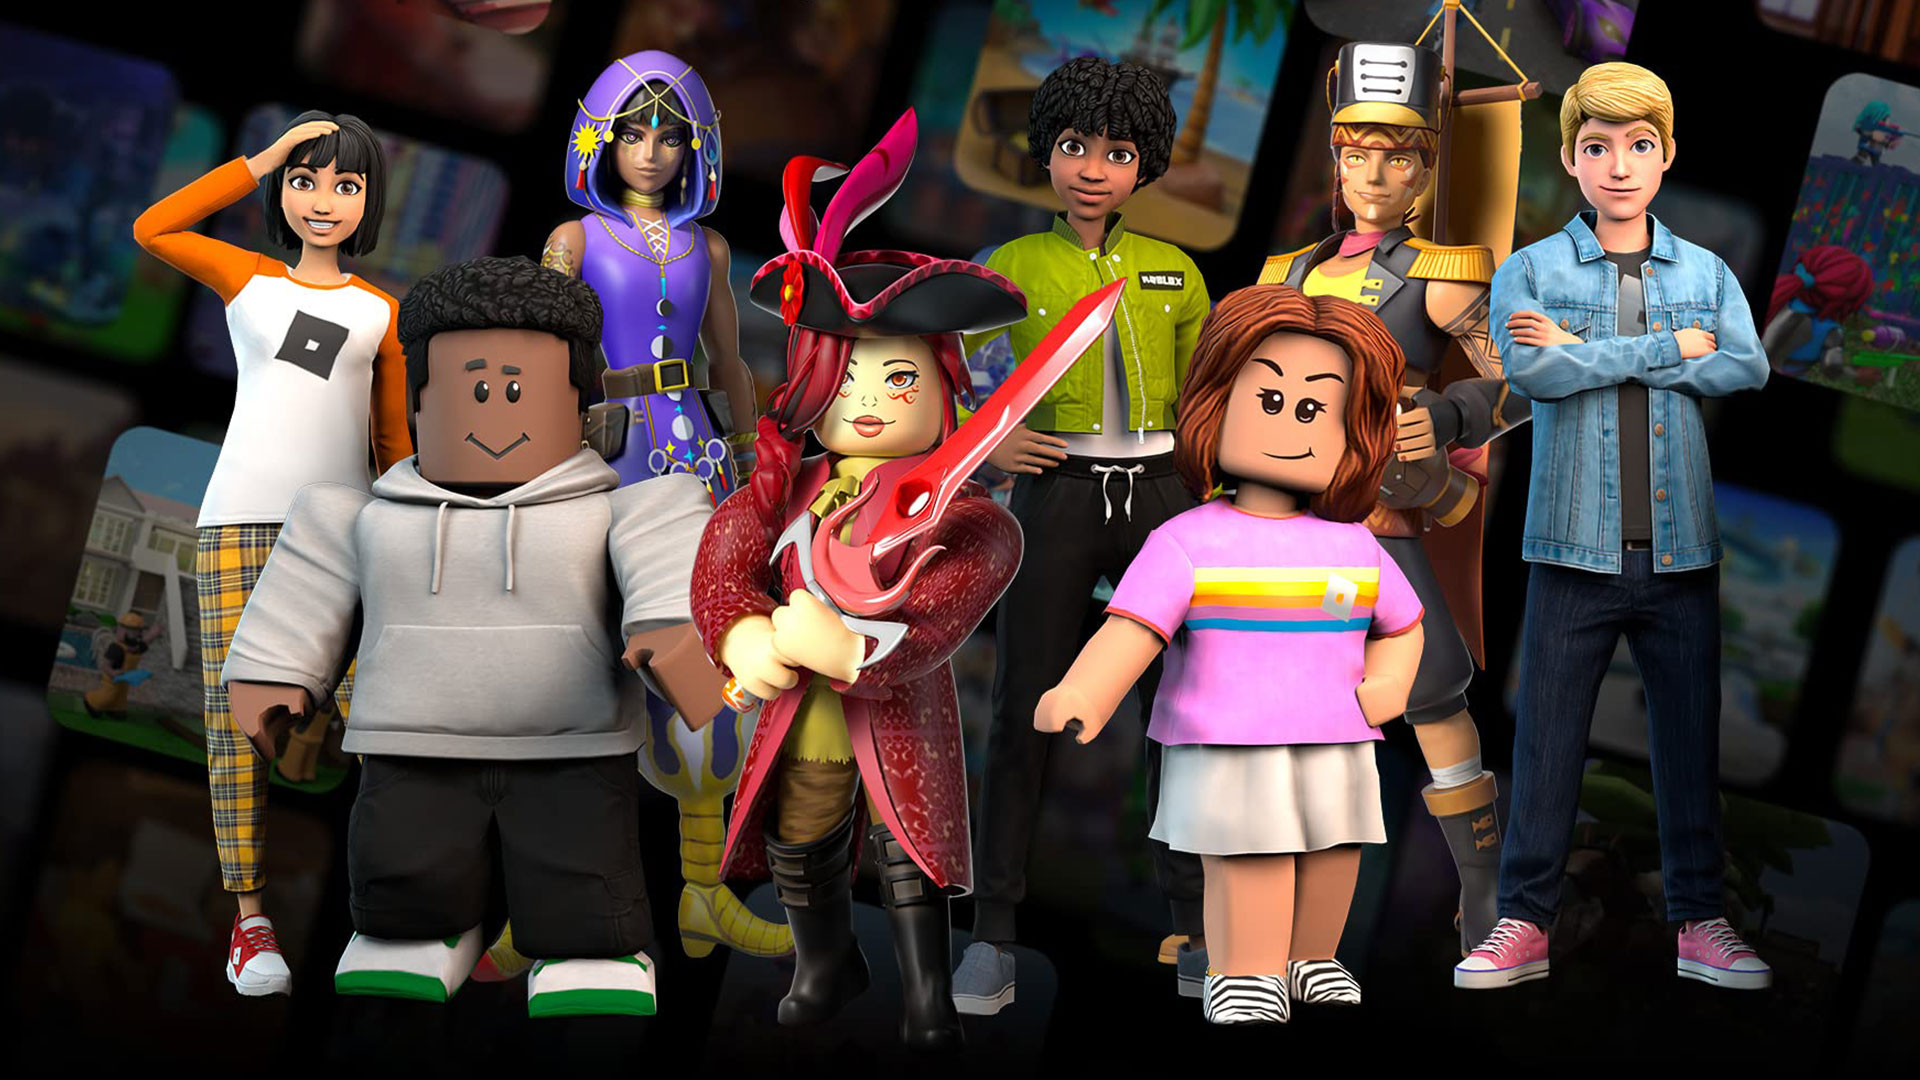 Roblox promo codes 2023 list with all working codes | GamesRadar+